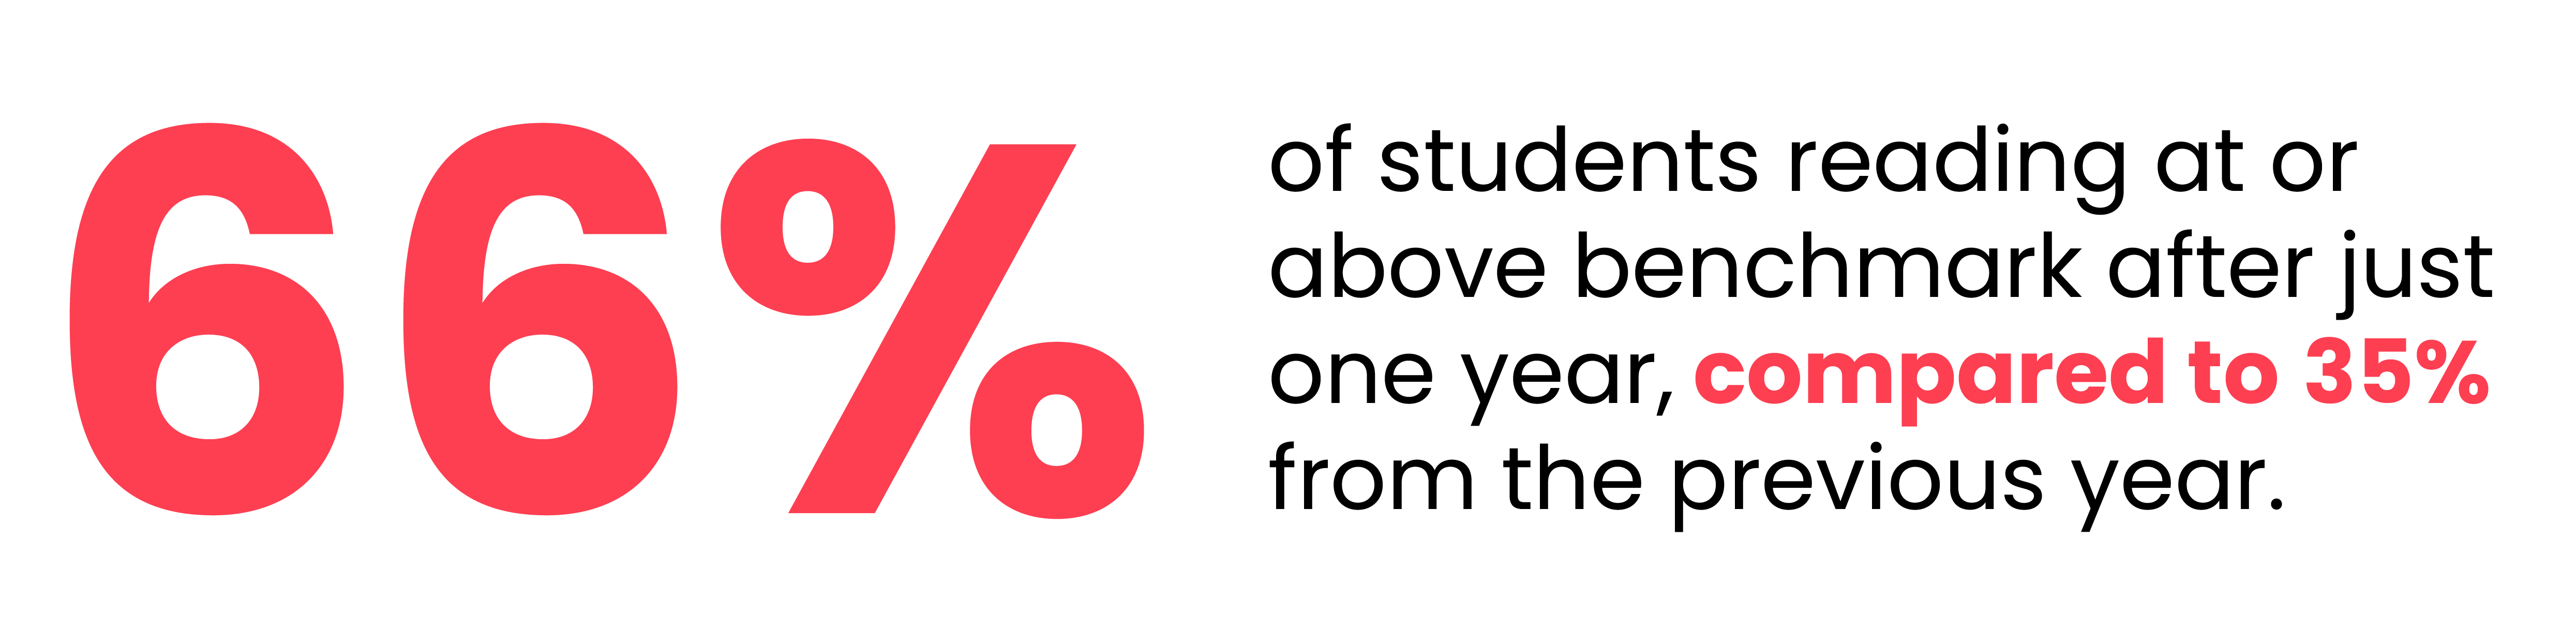 66% of students reading at or above benchmark after just one year, compared to 35% from the previous year prior.